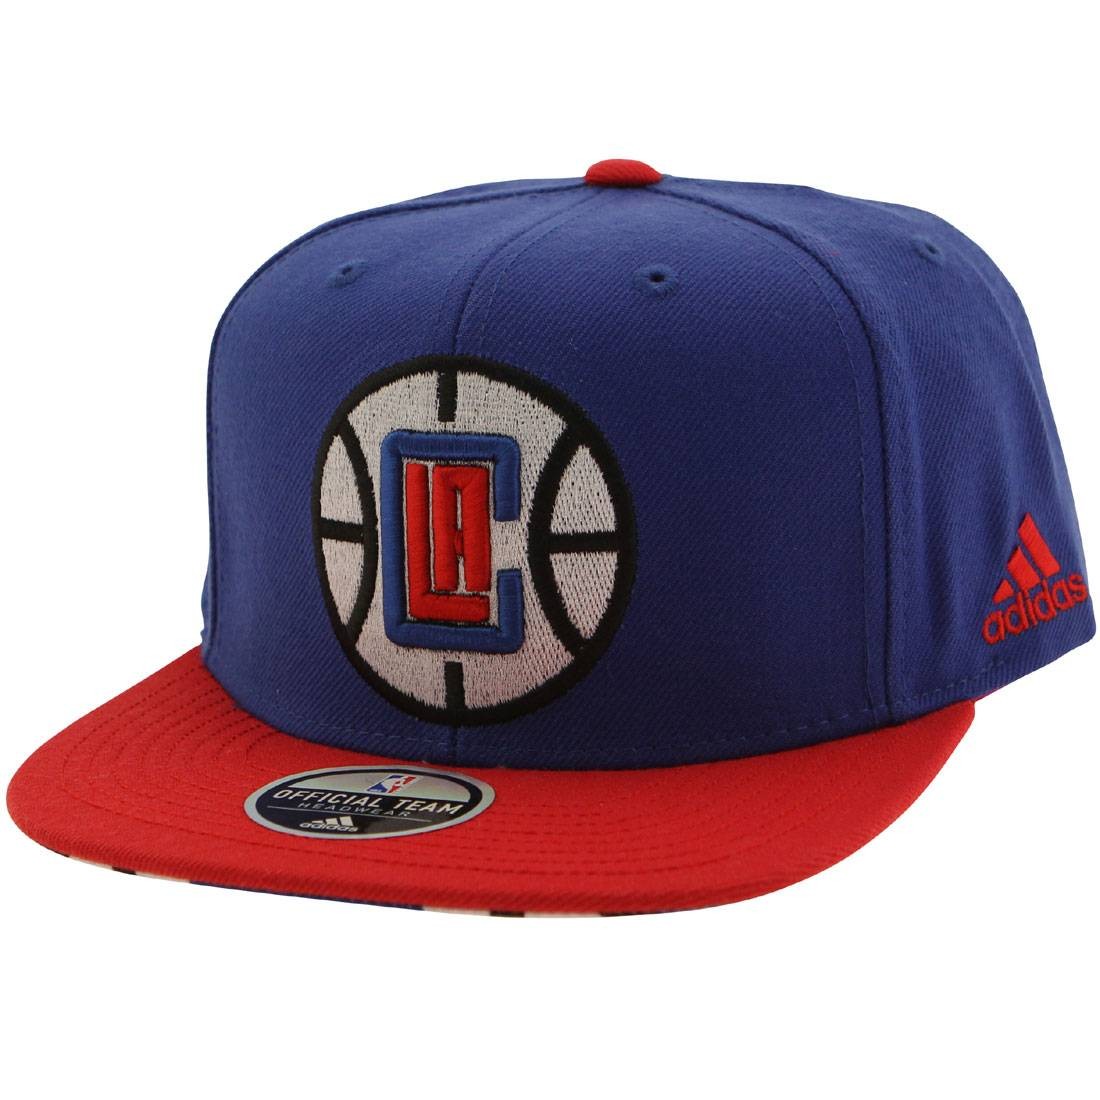  adidas Los Angeles Clippers NBA Blue NBA Authentic On